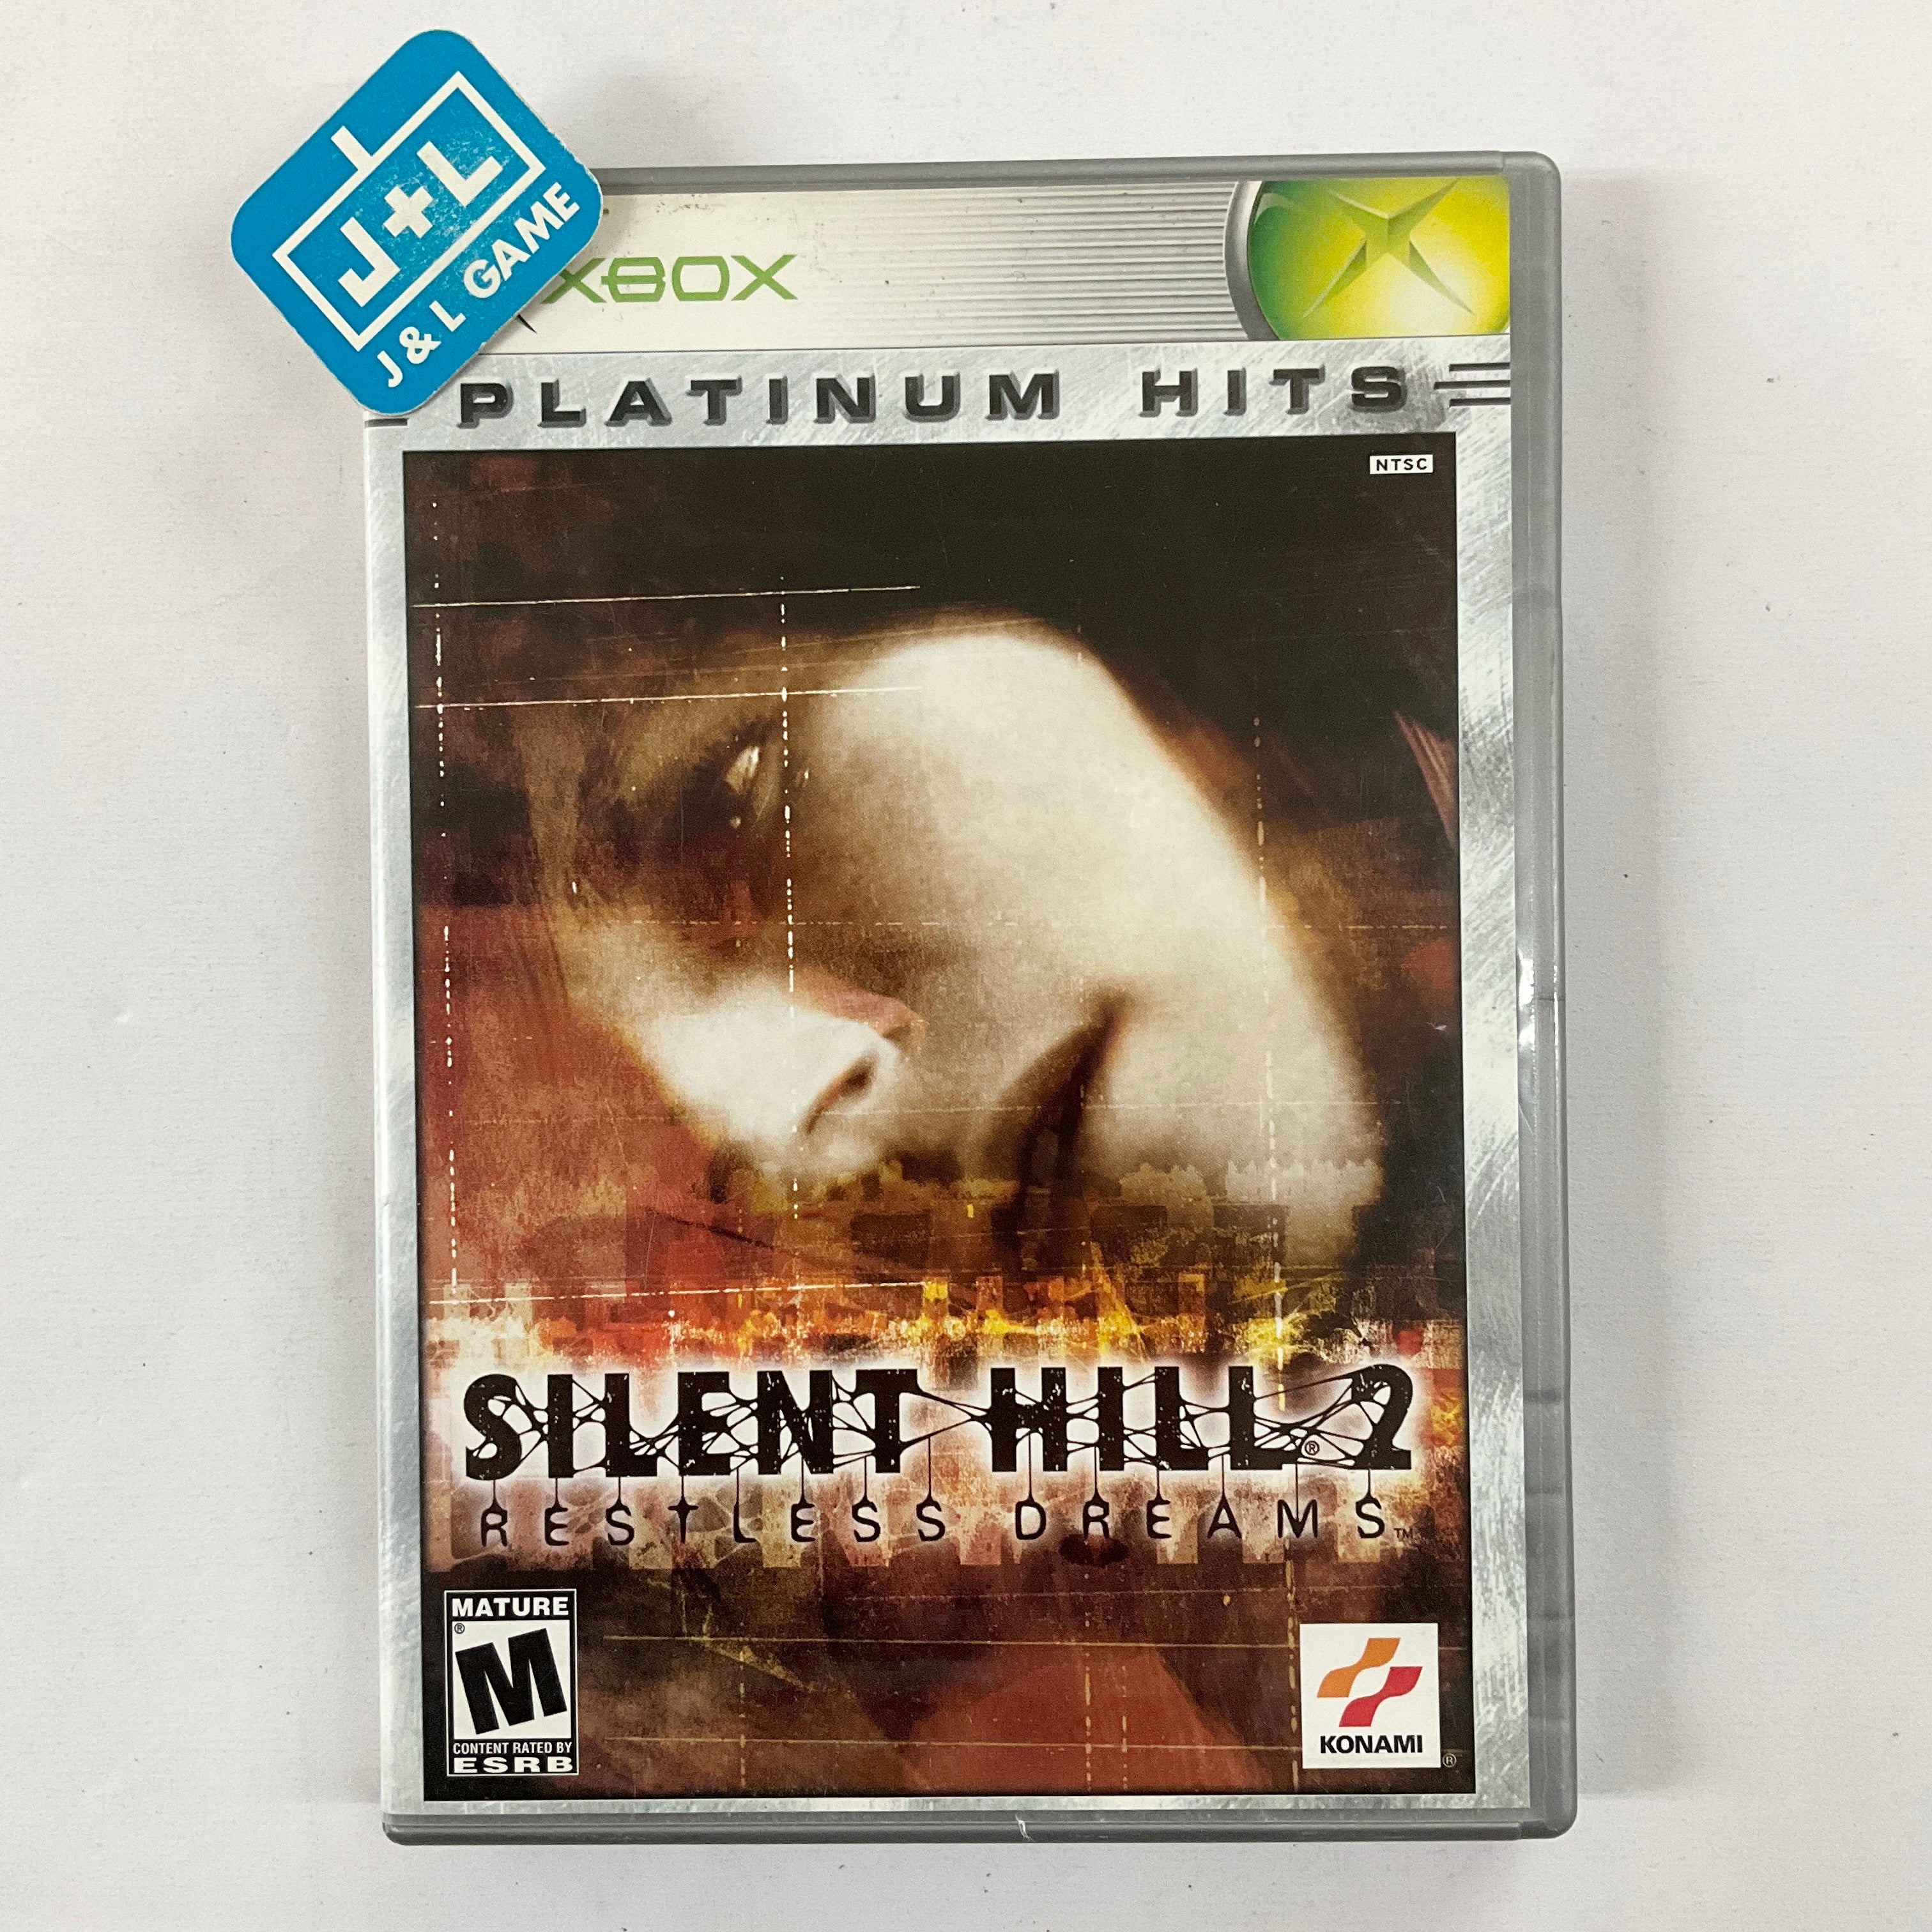 Silent Hill 2: Restless Dreams (Platinum Hits) - (XB) Xbox [Pre-Owned]